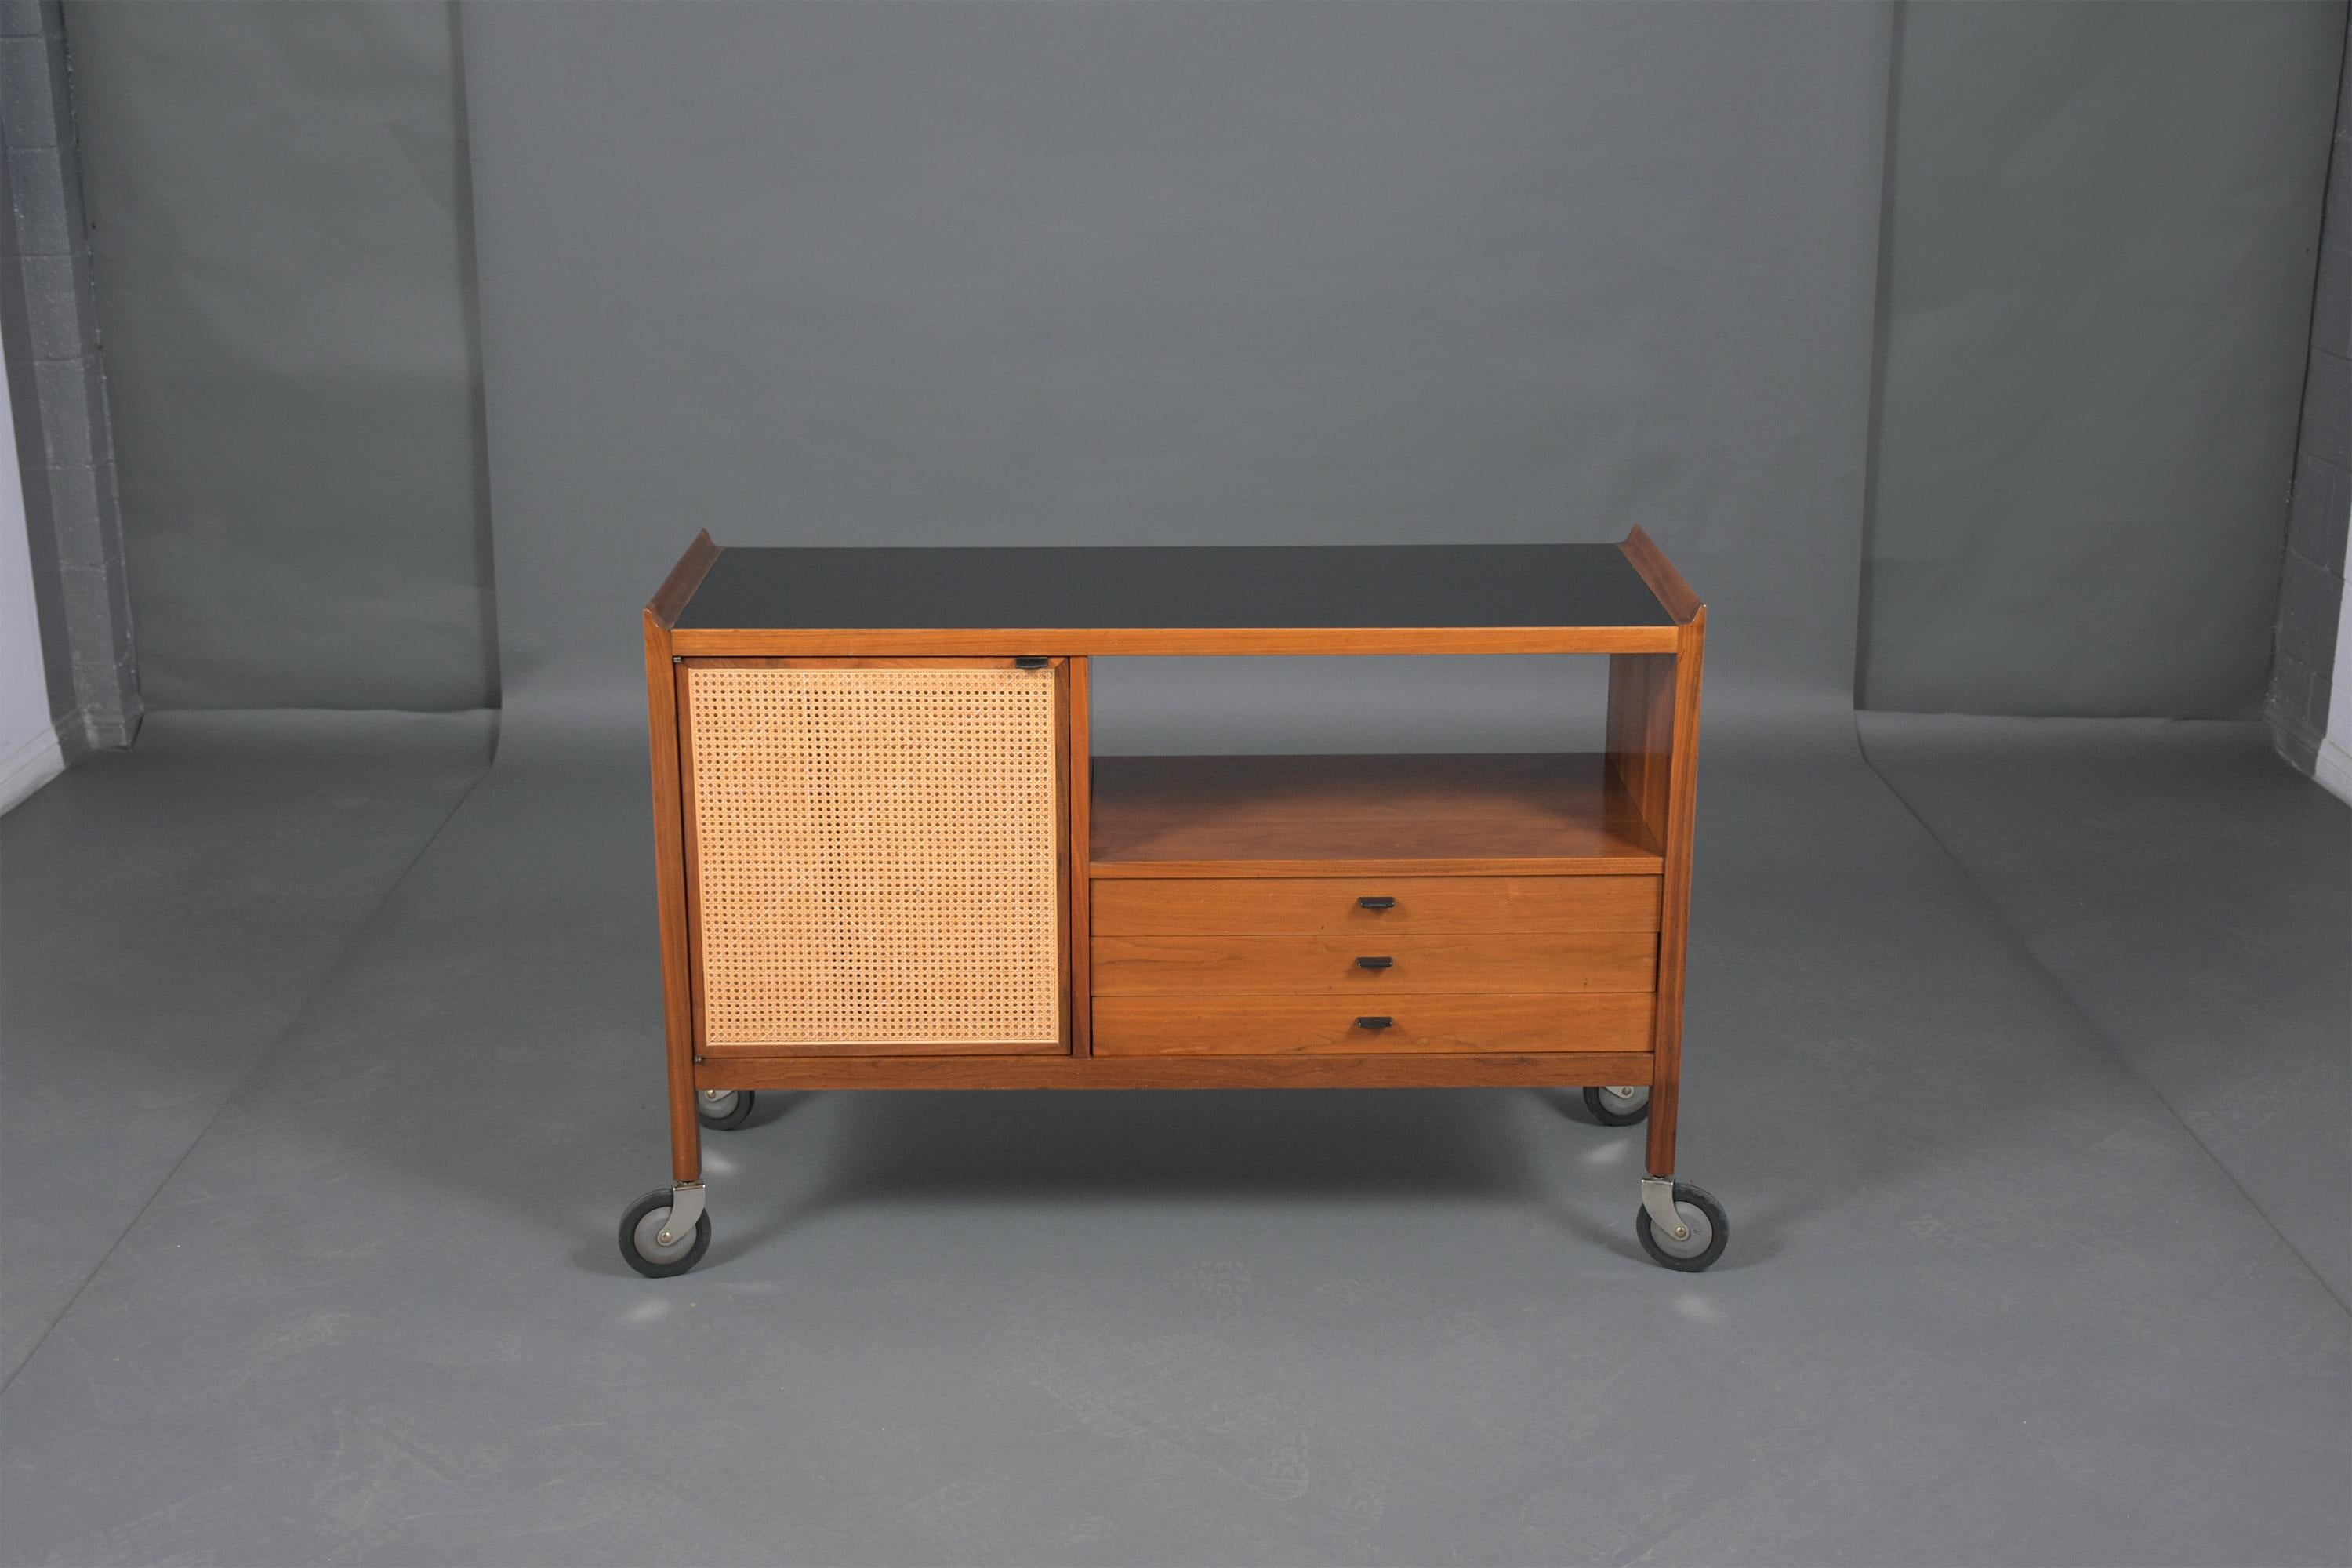 An extraordinary mid-century Danish Drybar hand-crafted out of teak wood in great condition this piece has been professionally restored by our team of in-house and features walnut color with lacquered finish a black color Formica top an underneath